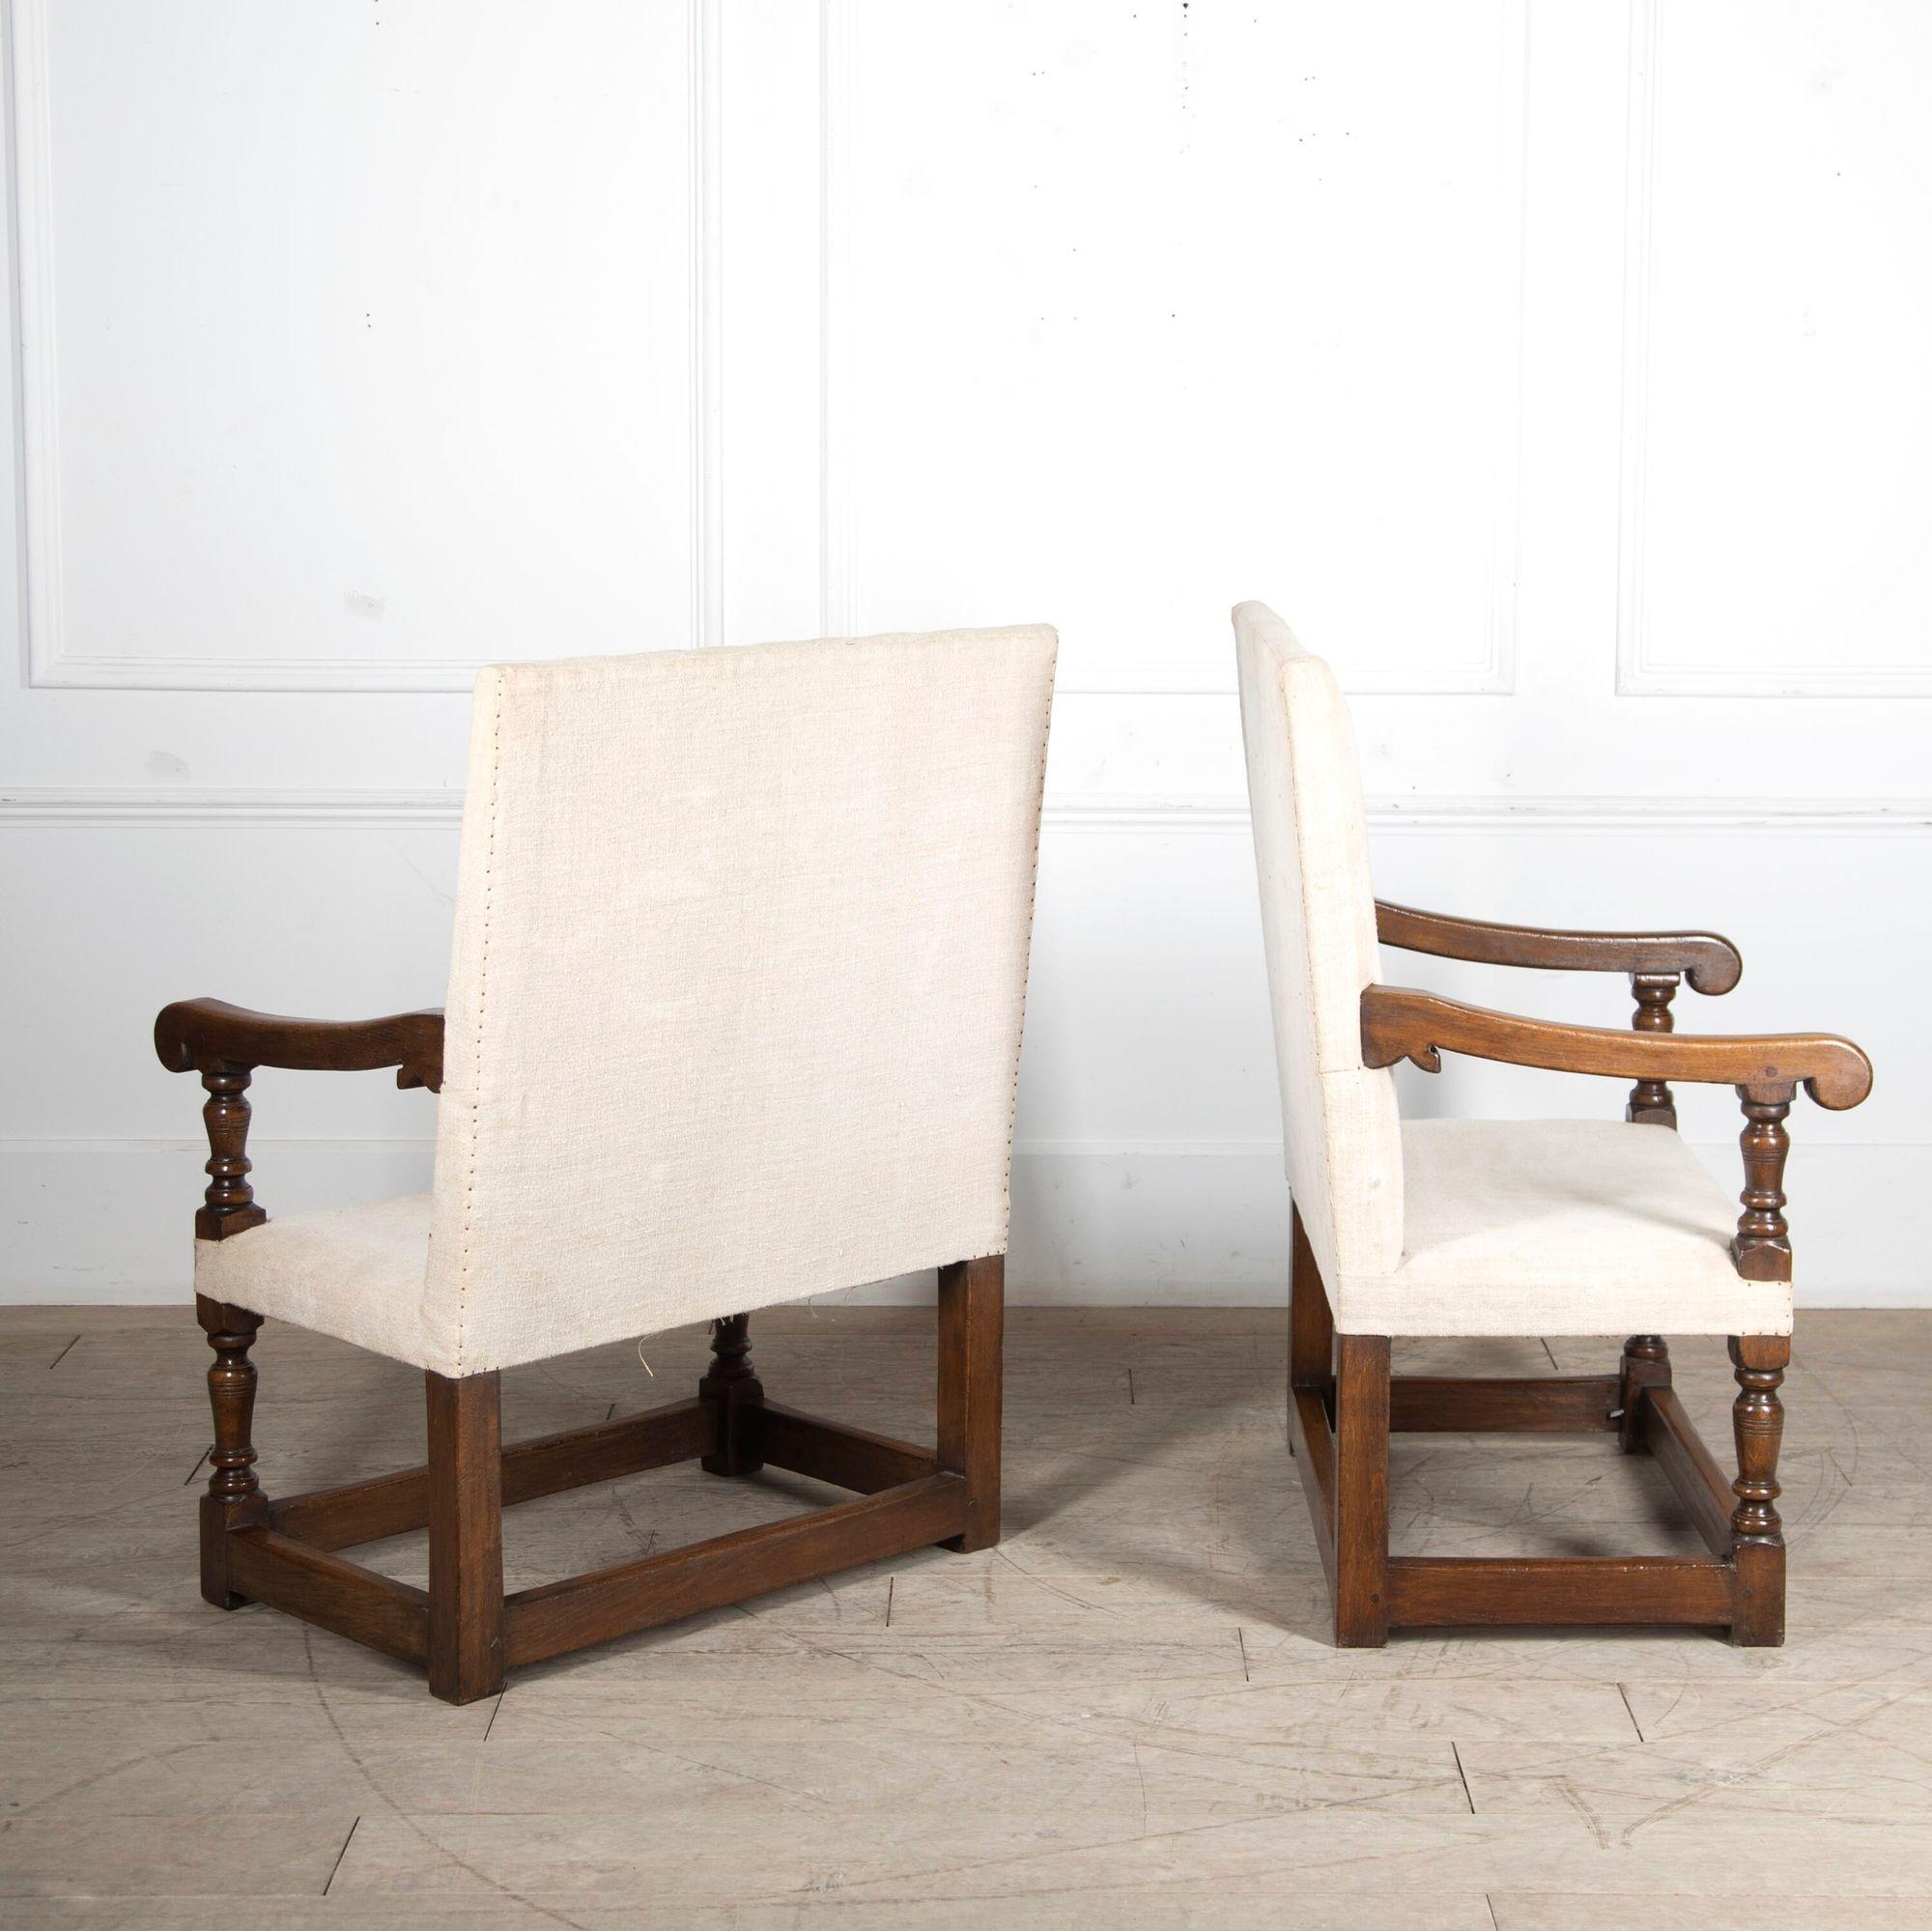 Pair of Arts and Crafts English oak farthingale armchairs.
These attractive chairs are in the 17th Century style with generous proportions.
Covered in French linen.